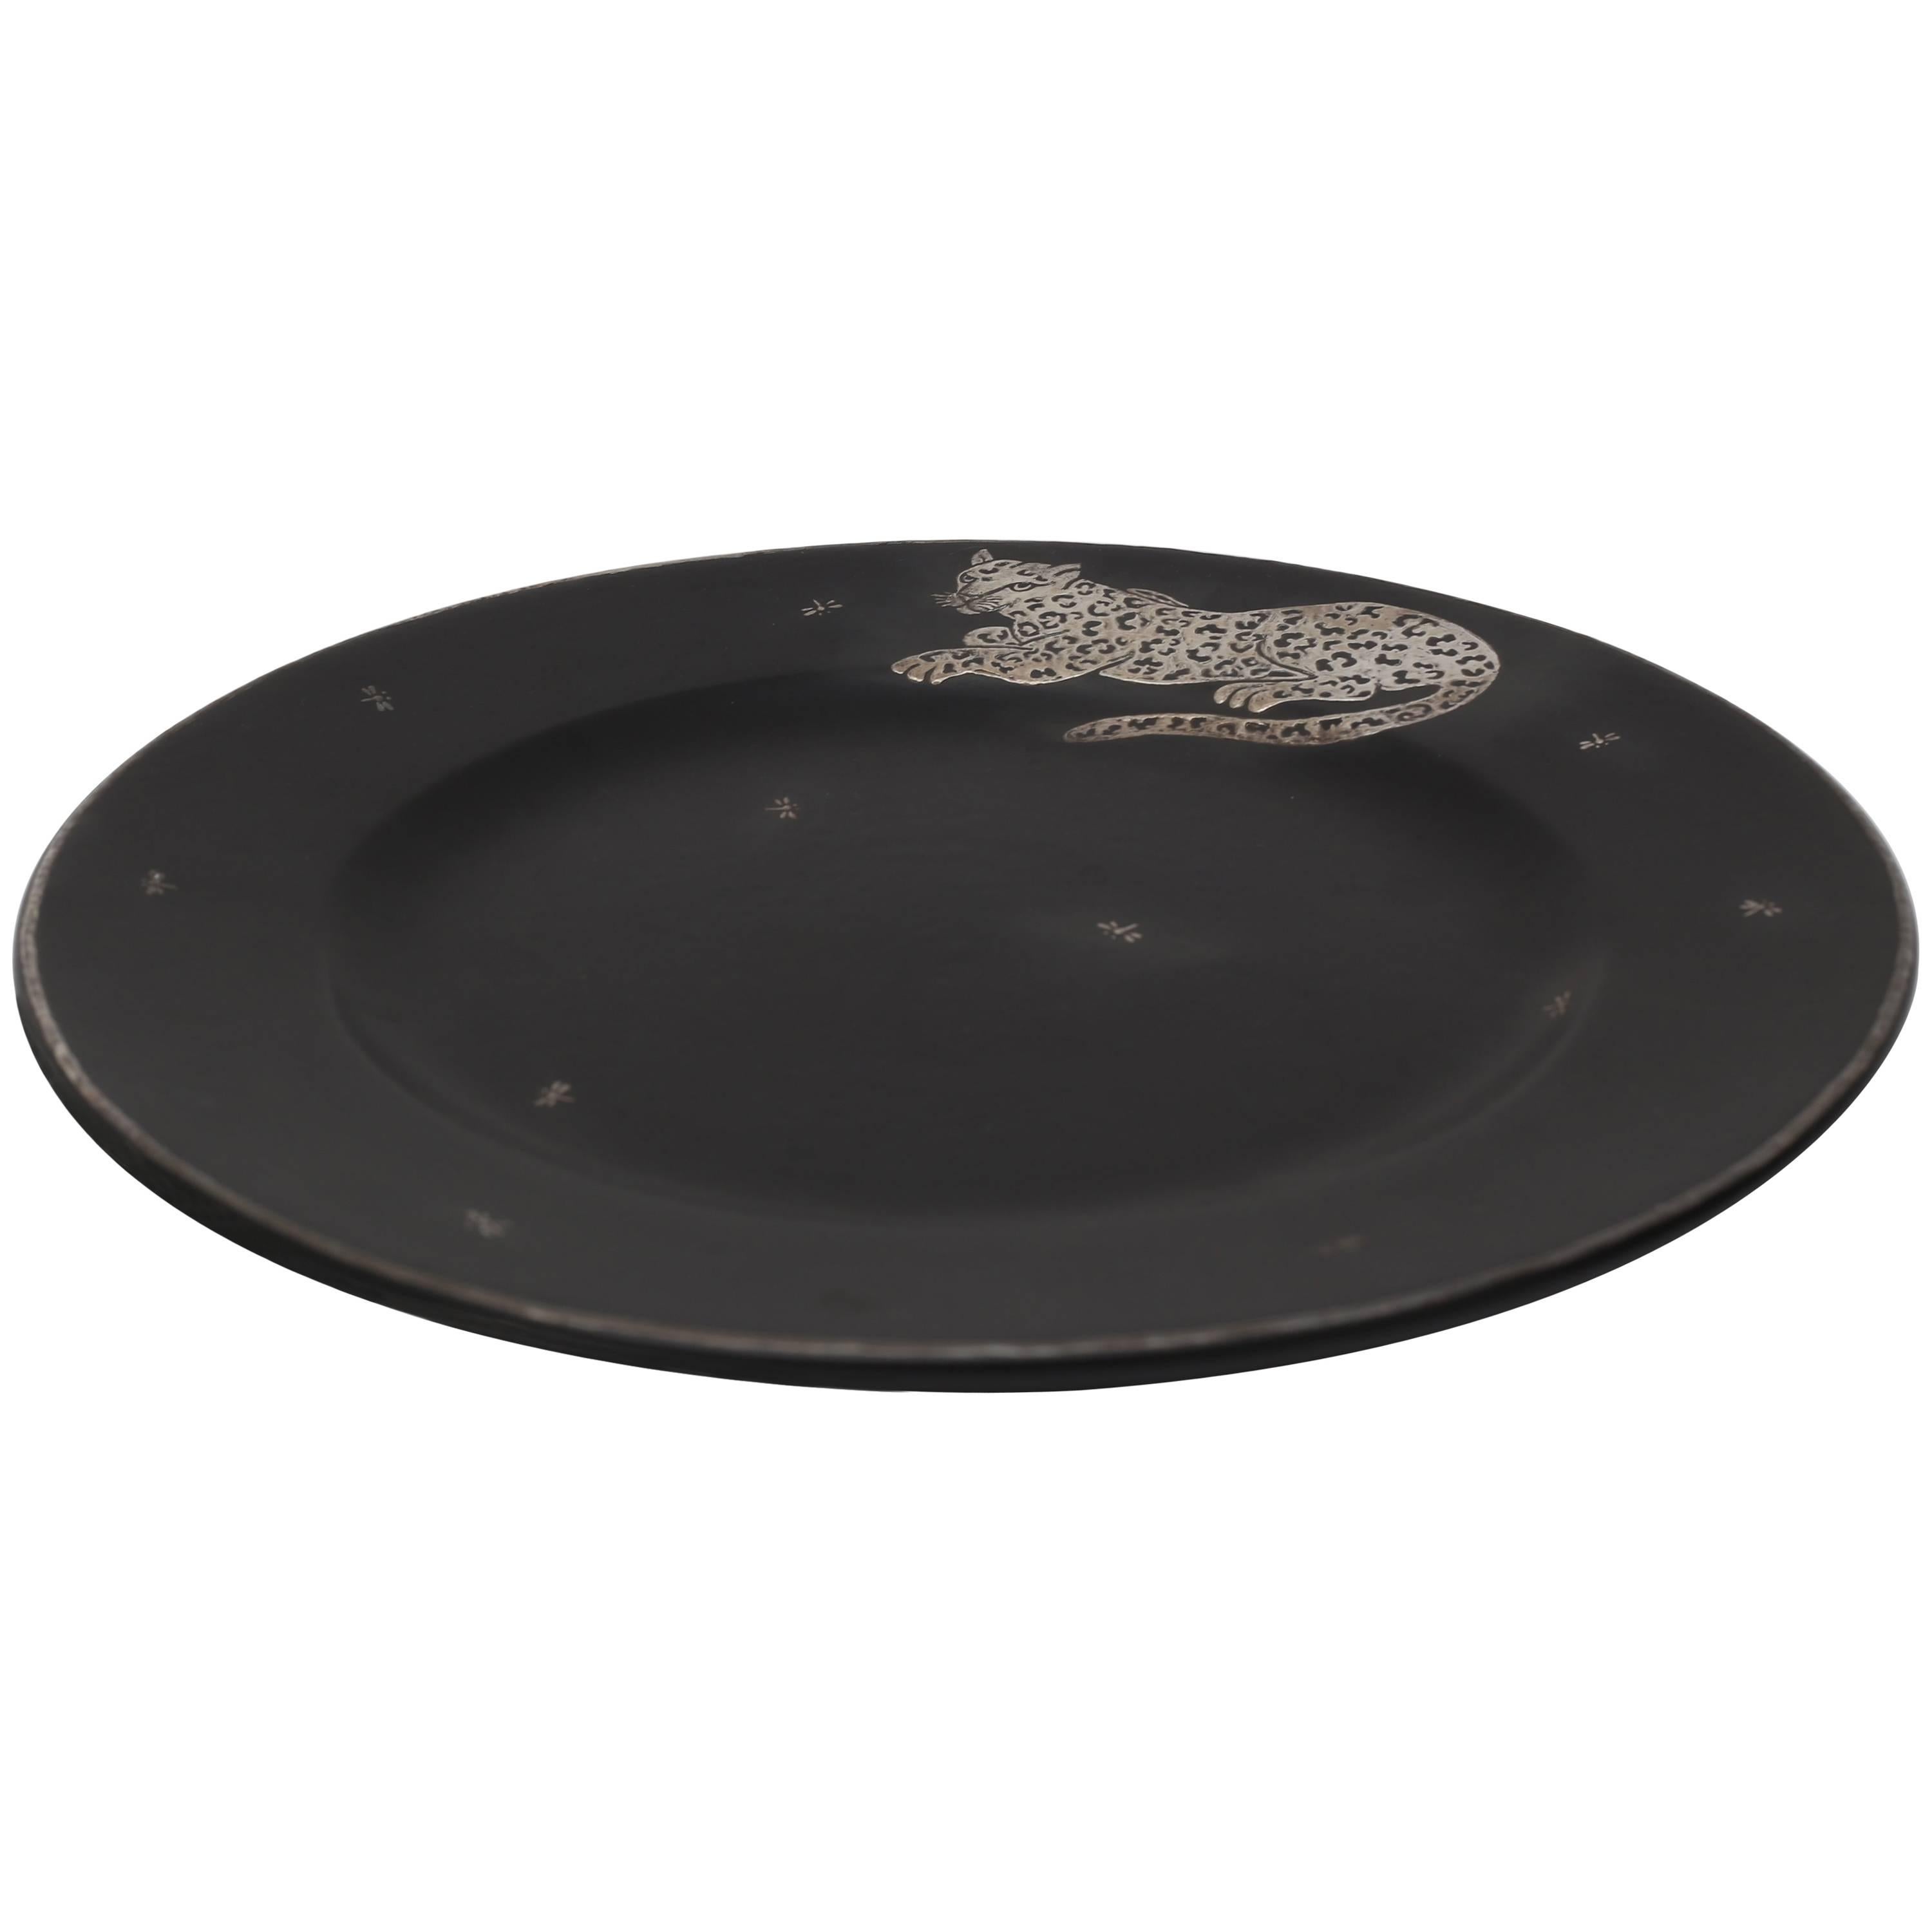 This stylish charger plate was created by Emilia Castillo and date to 2009. The basalt black coloration and sterling silver overlay of the jaguar and dragonflies makes for a charming and striking piece.

Note: Signed and dated on the reverse (see